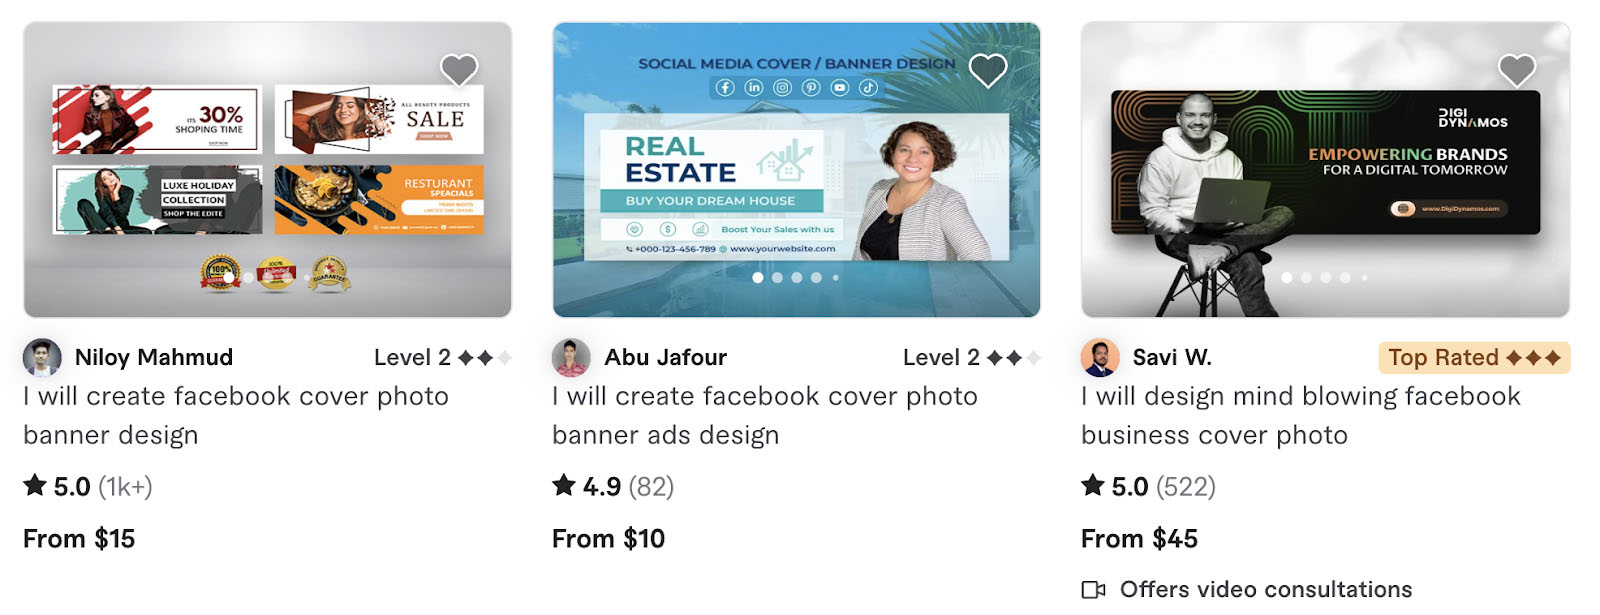 Screenshot of Fiverr Facebook cover photo services.